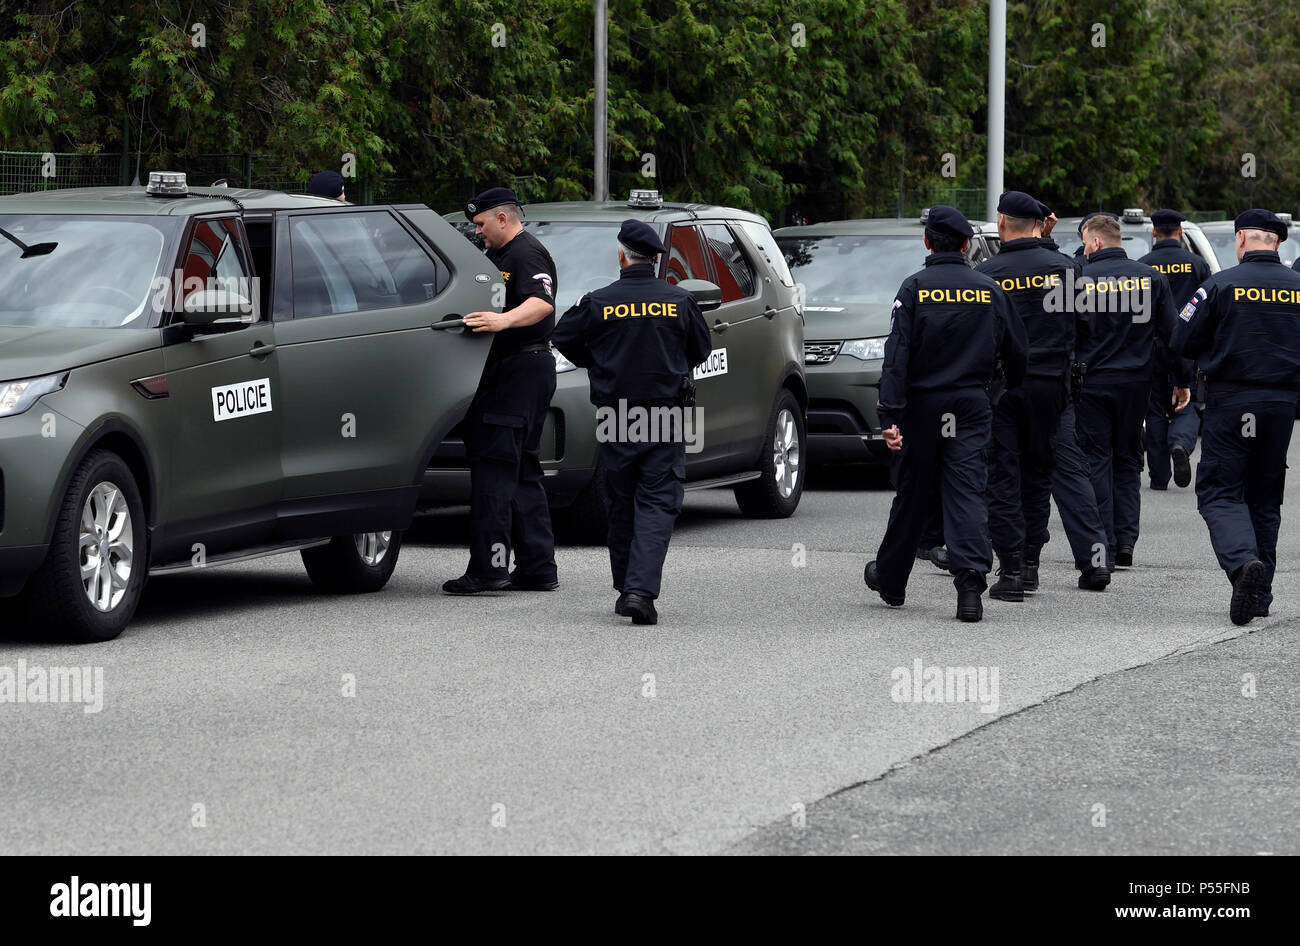 Czech police officers attend a festive departure of Czech police to foreign mission in Macedonia and Serbia, in Prague, Czech Republic, on June 25, 2018. (CTK Photo/Michal Krumphanzl) Stock Photo